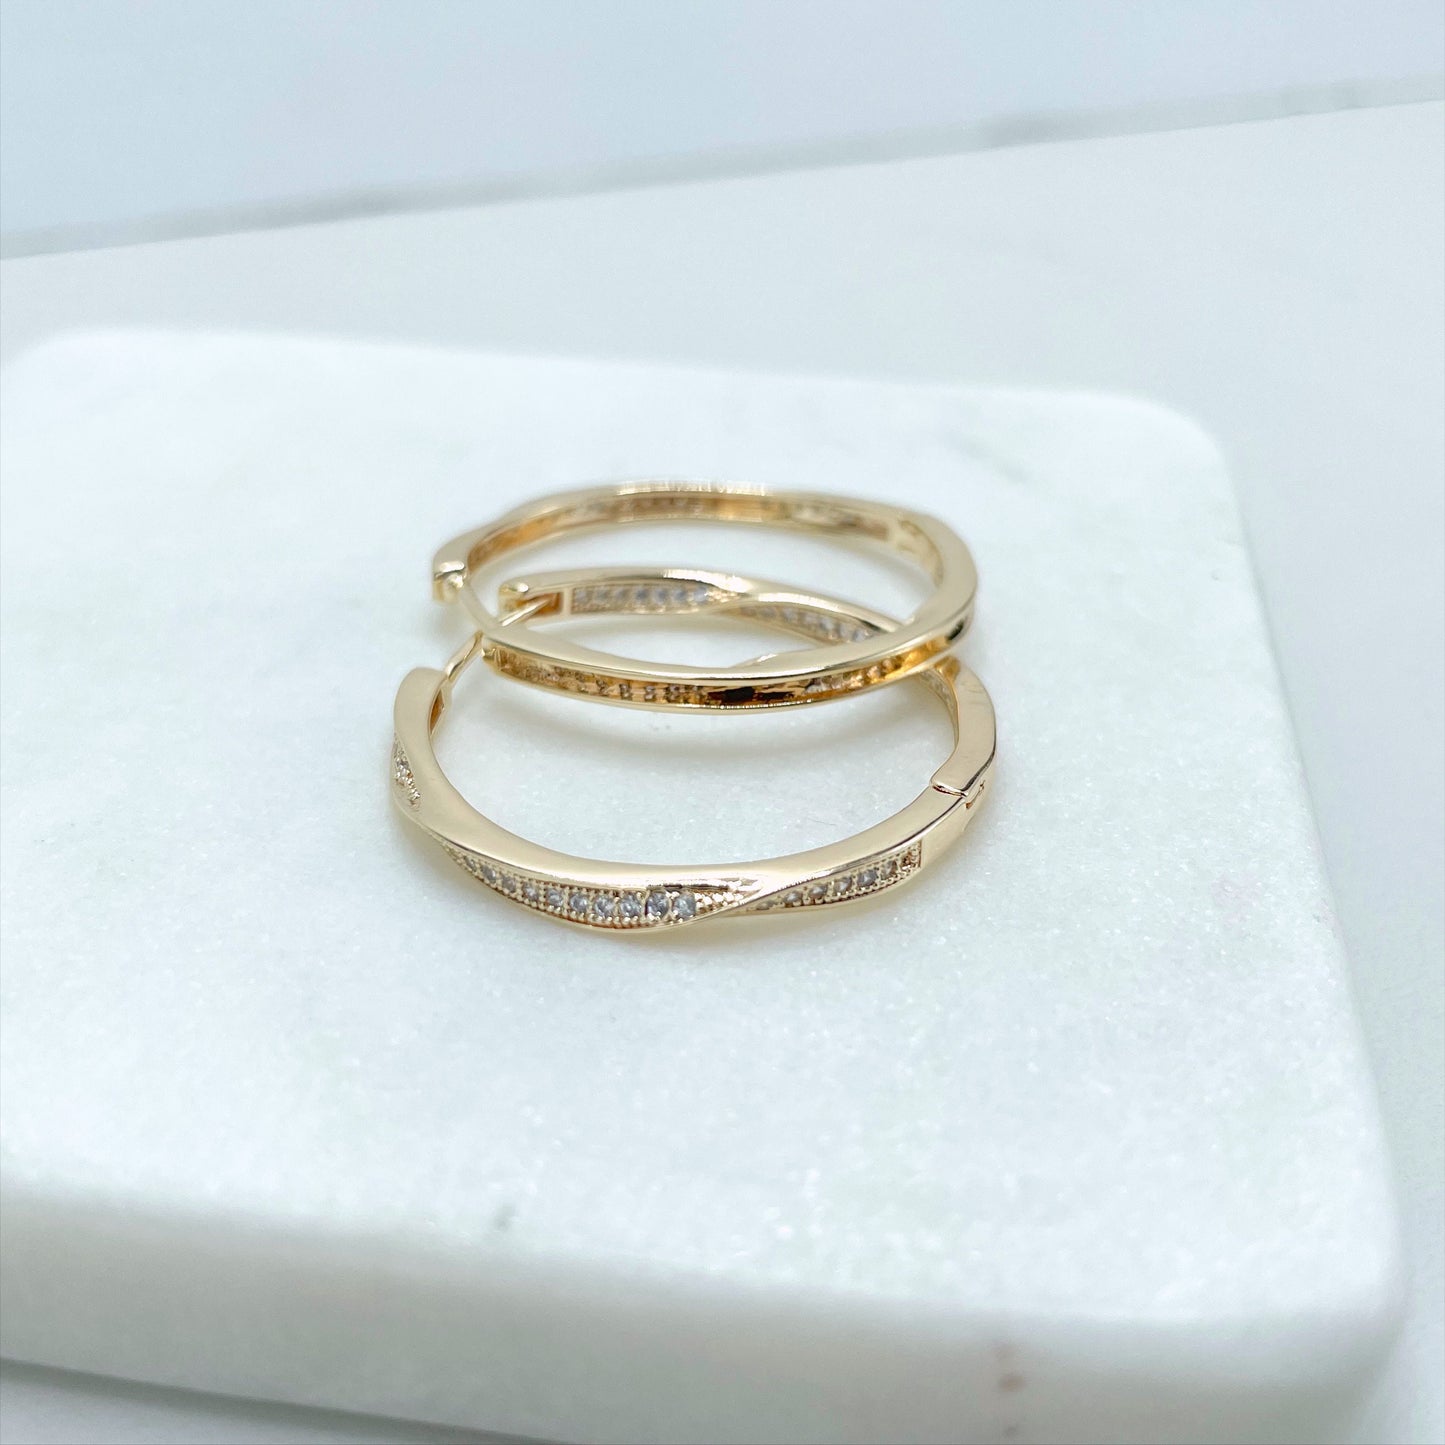 18k Gold Filled, Twisted 34mm Hoop Earrings with Micro Pave, Cubic Zirconia, Dainty Hoops, Zircon Hoops, Wholesale Jewelry Making Supplies